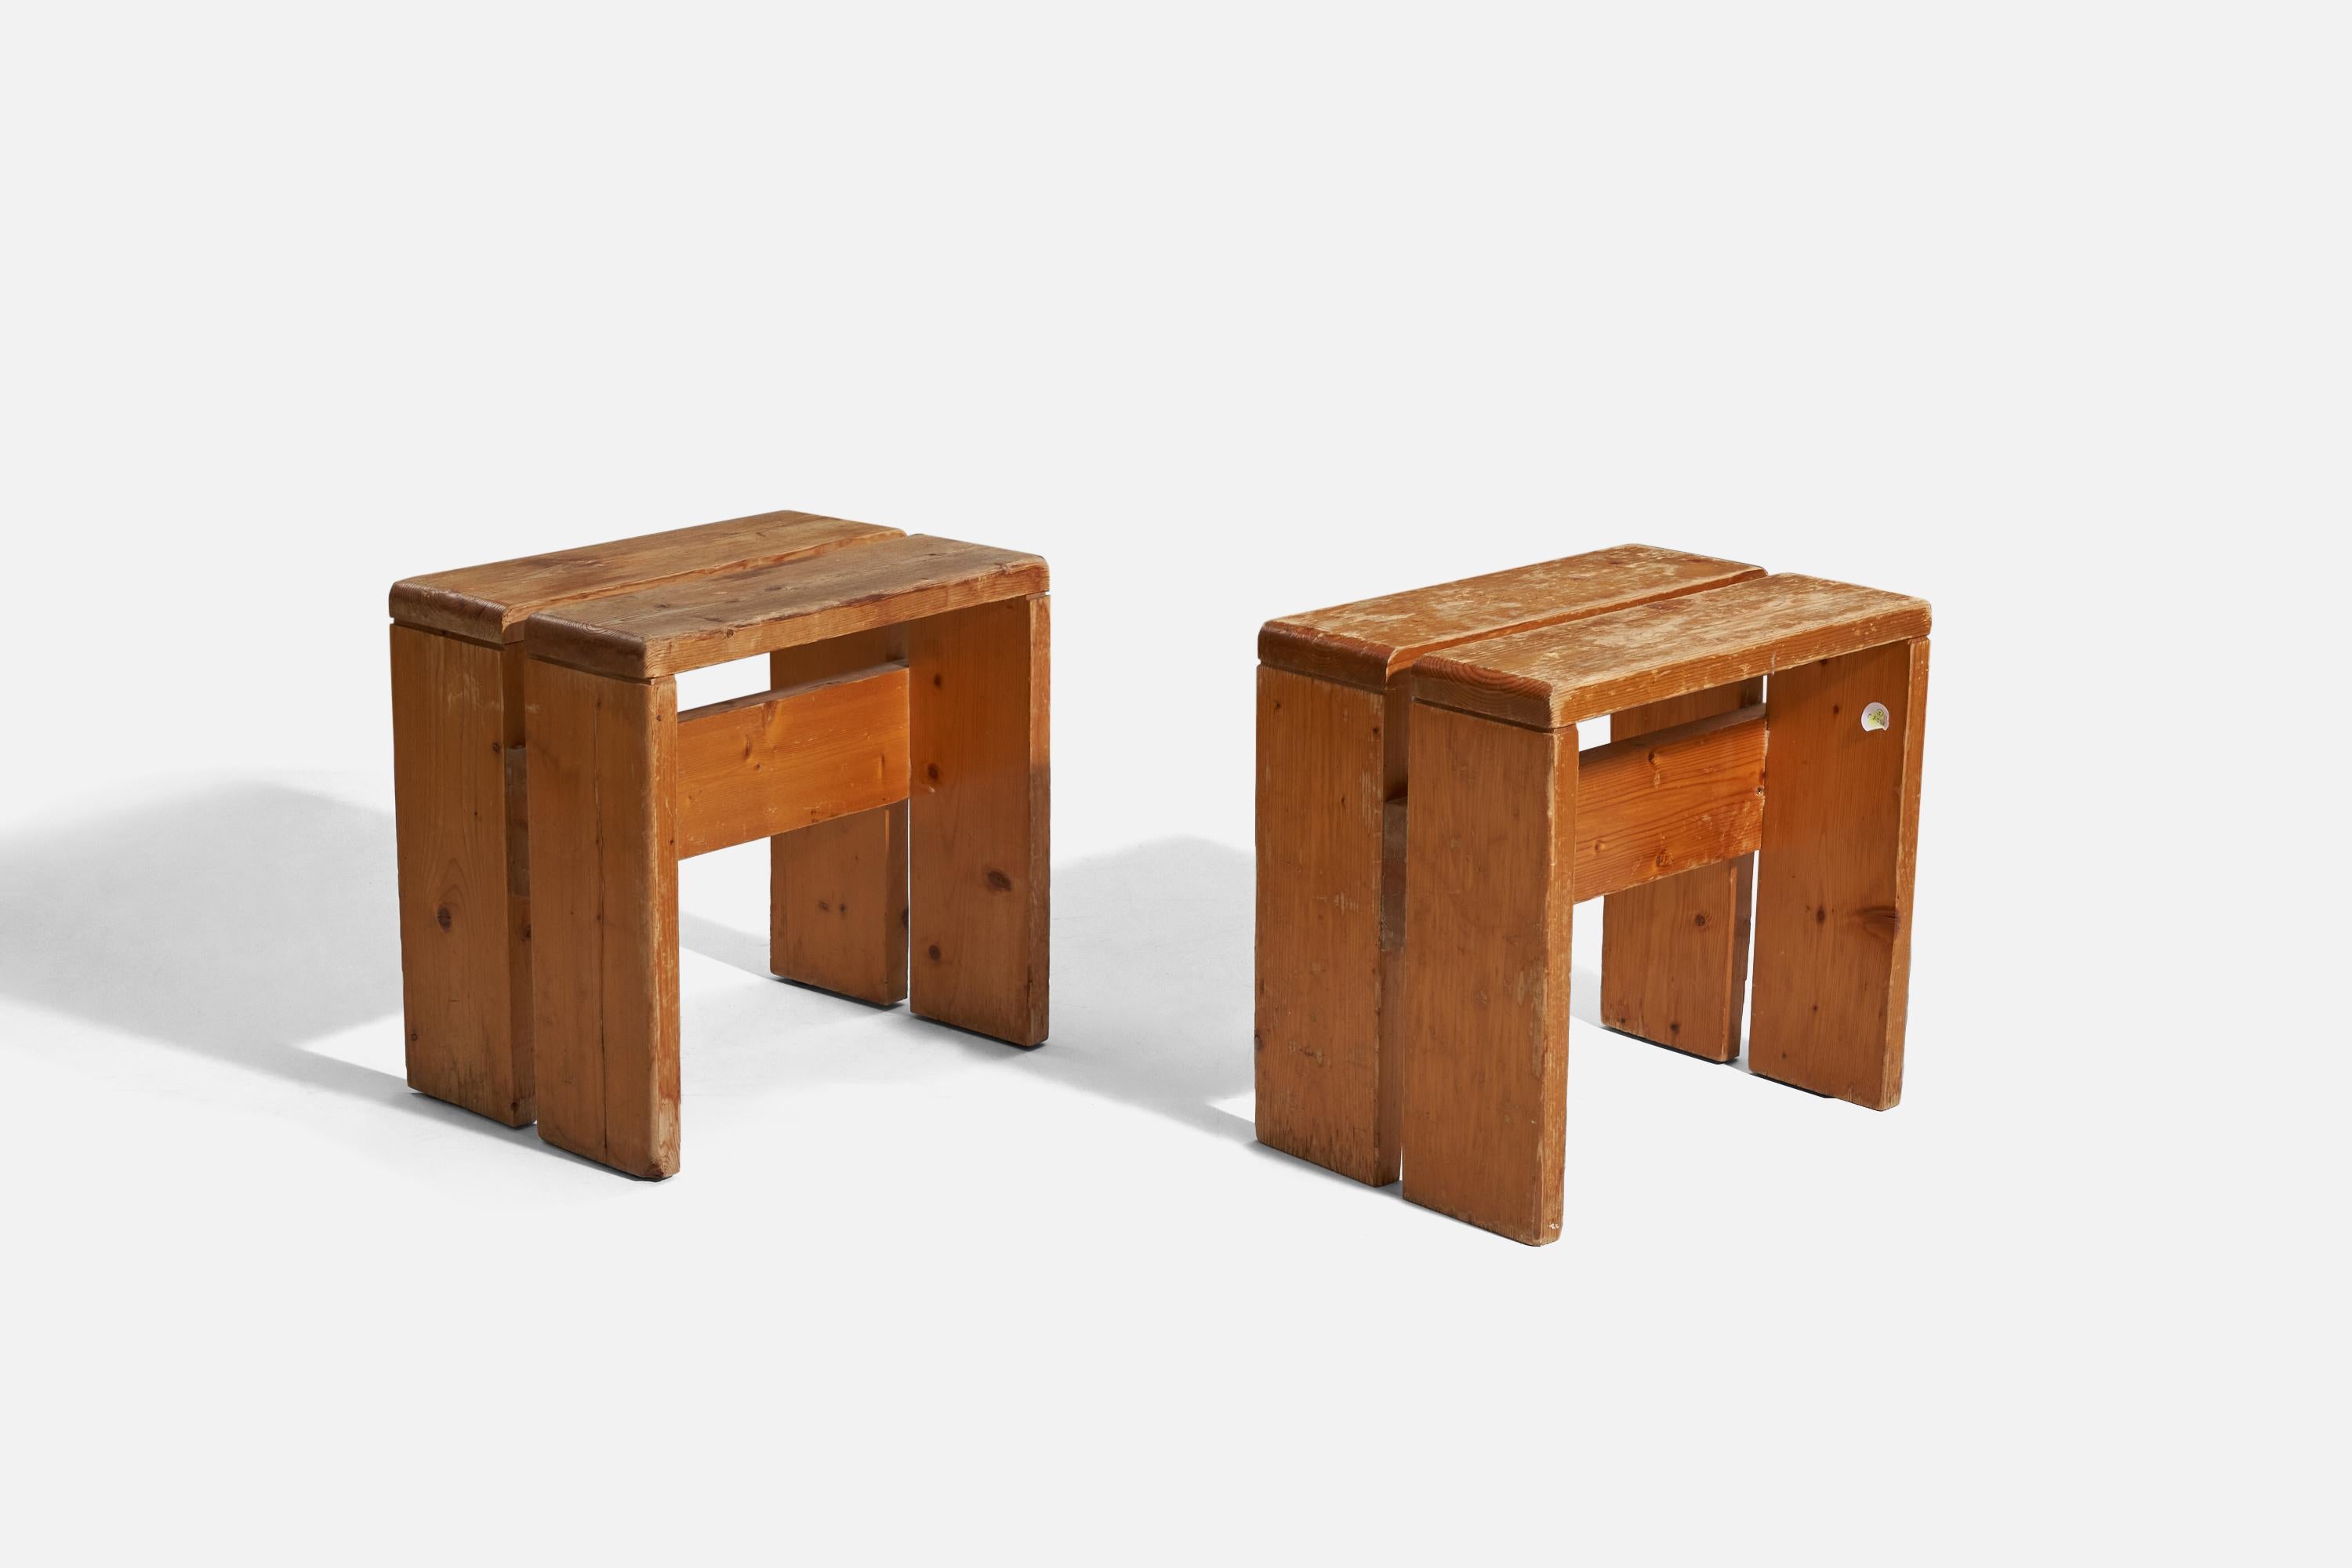 A pair of pine stools, designed and produced by Charlotte Perriand, France, 1968. Designed for Les Arcs ski resort.